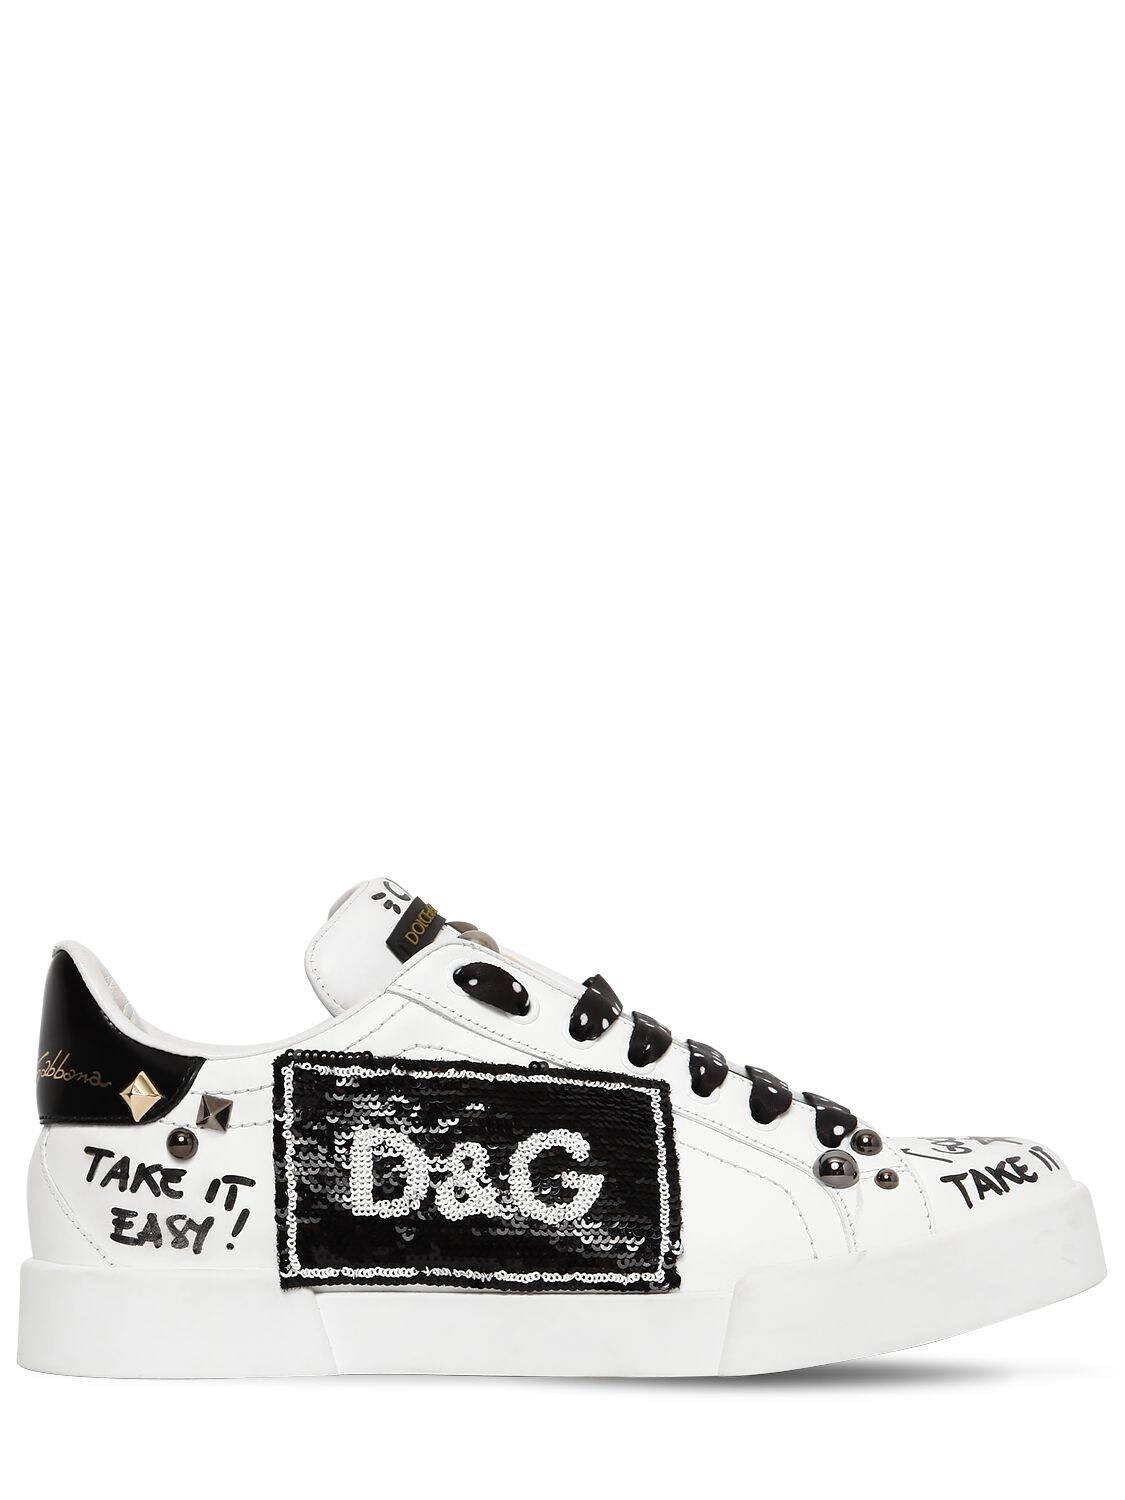 DOLCE & GABBANA 30MM SEQUINED & STUDDED LEATHER trainers,67I82T004-ODk2OTc1